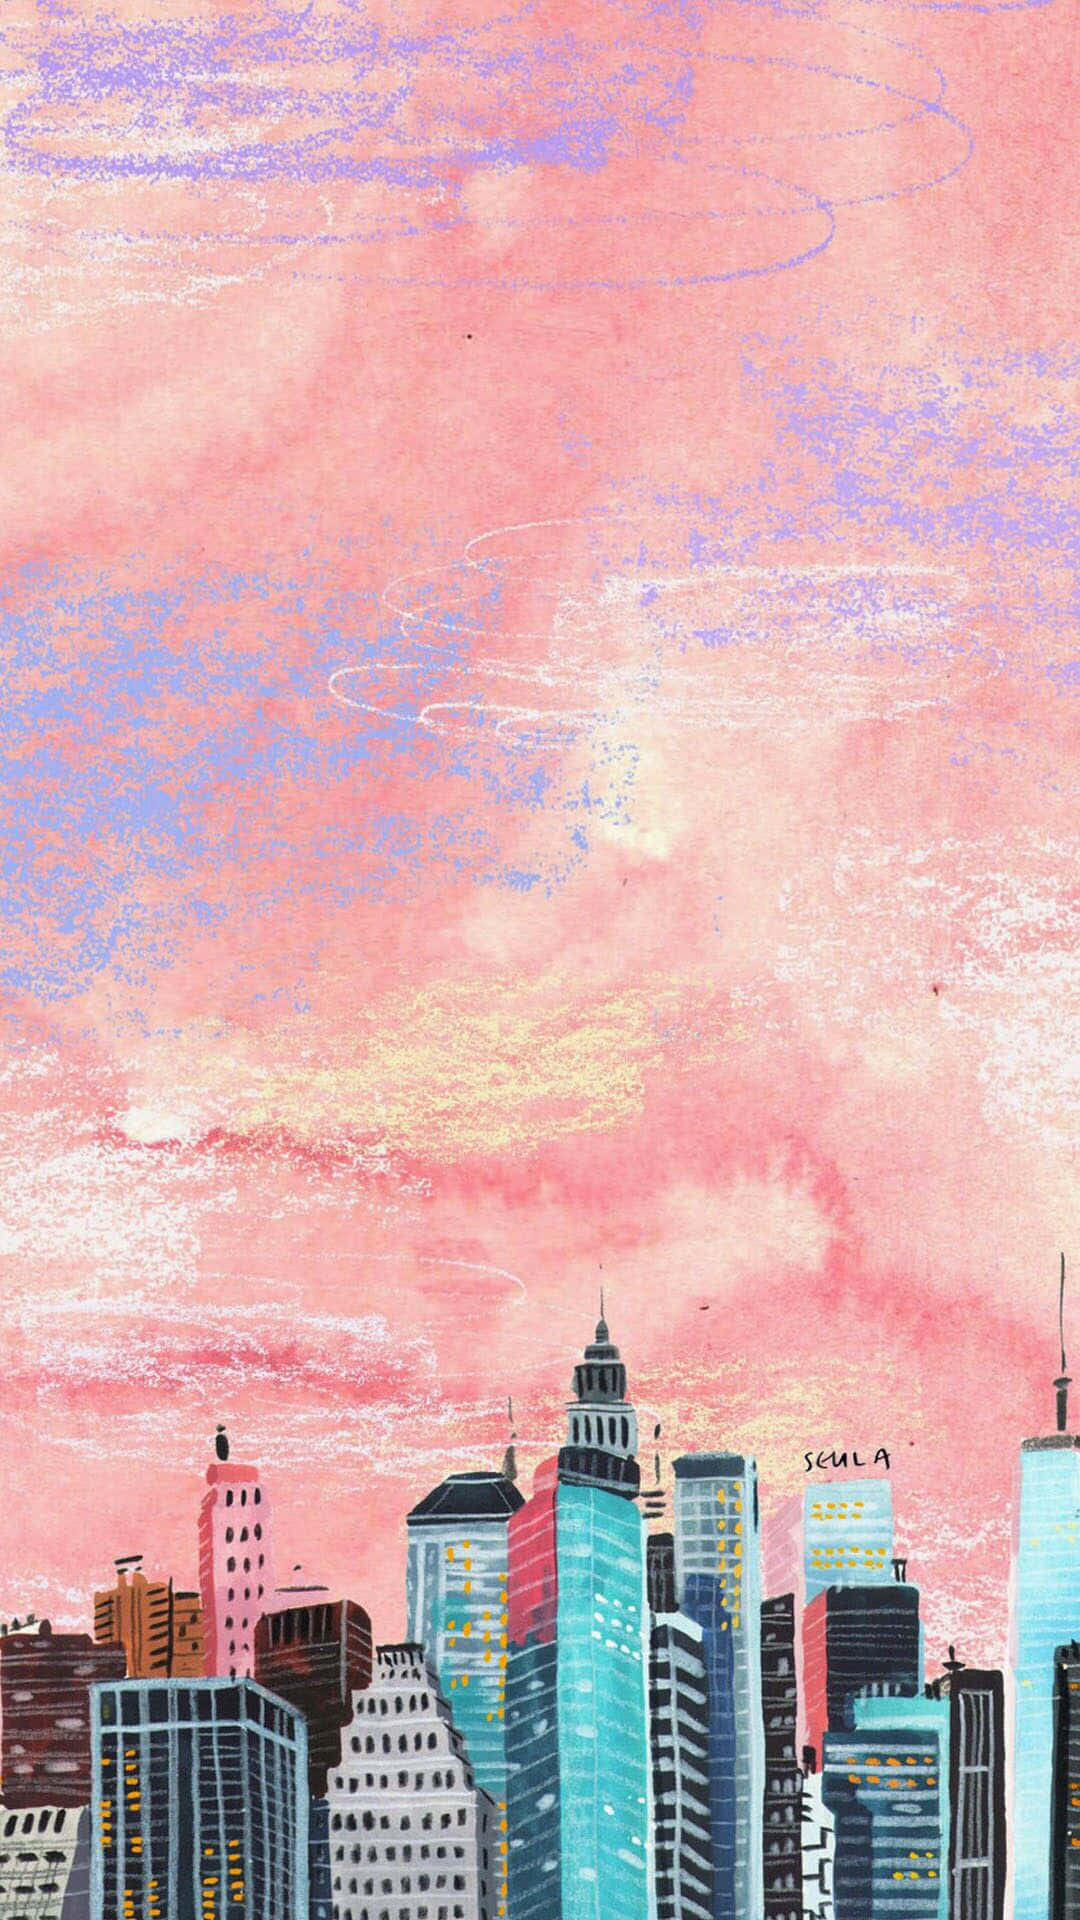 Dreamy Watercolor Painting for iPhone Wallpaper